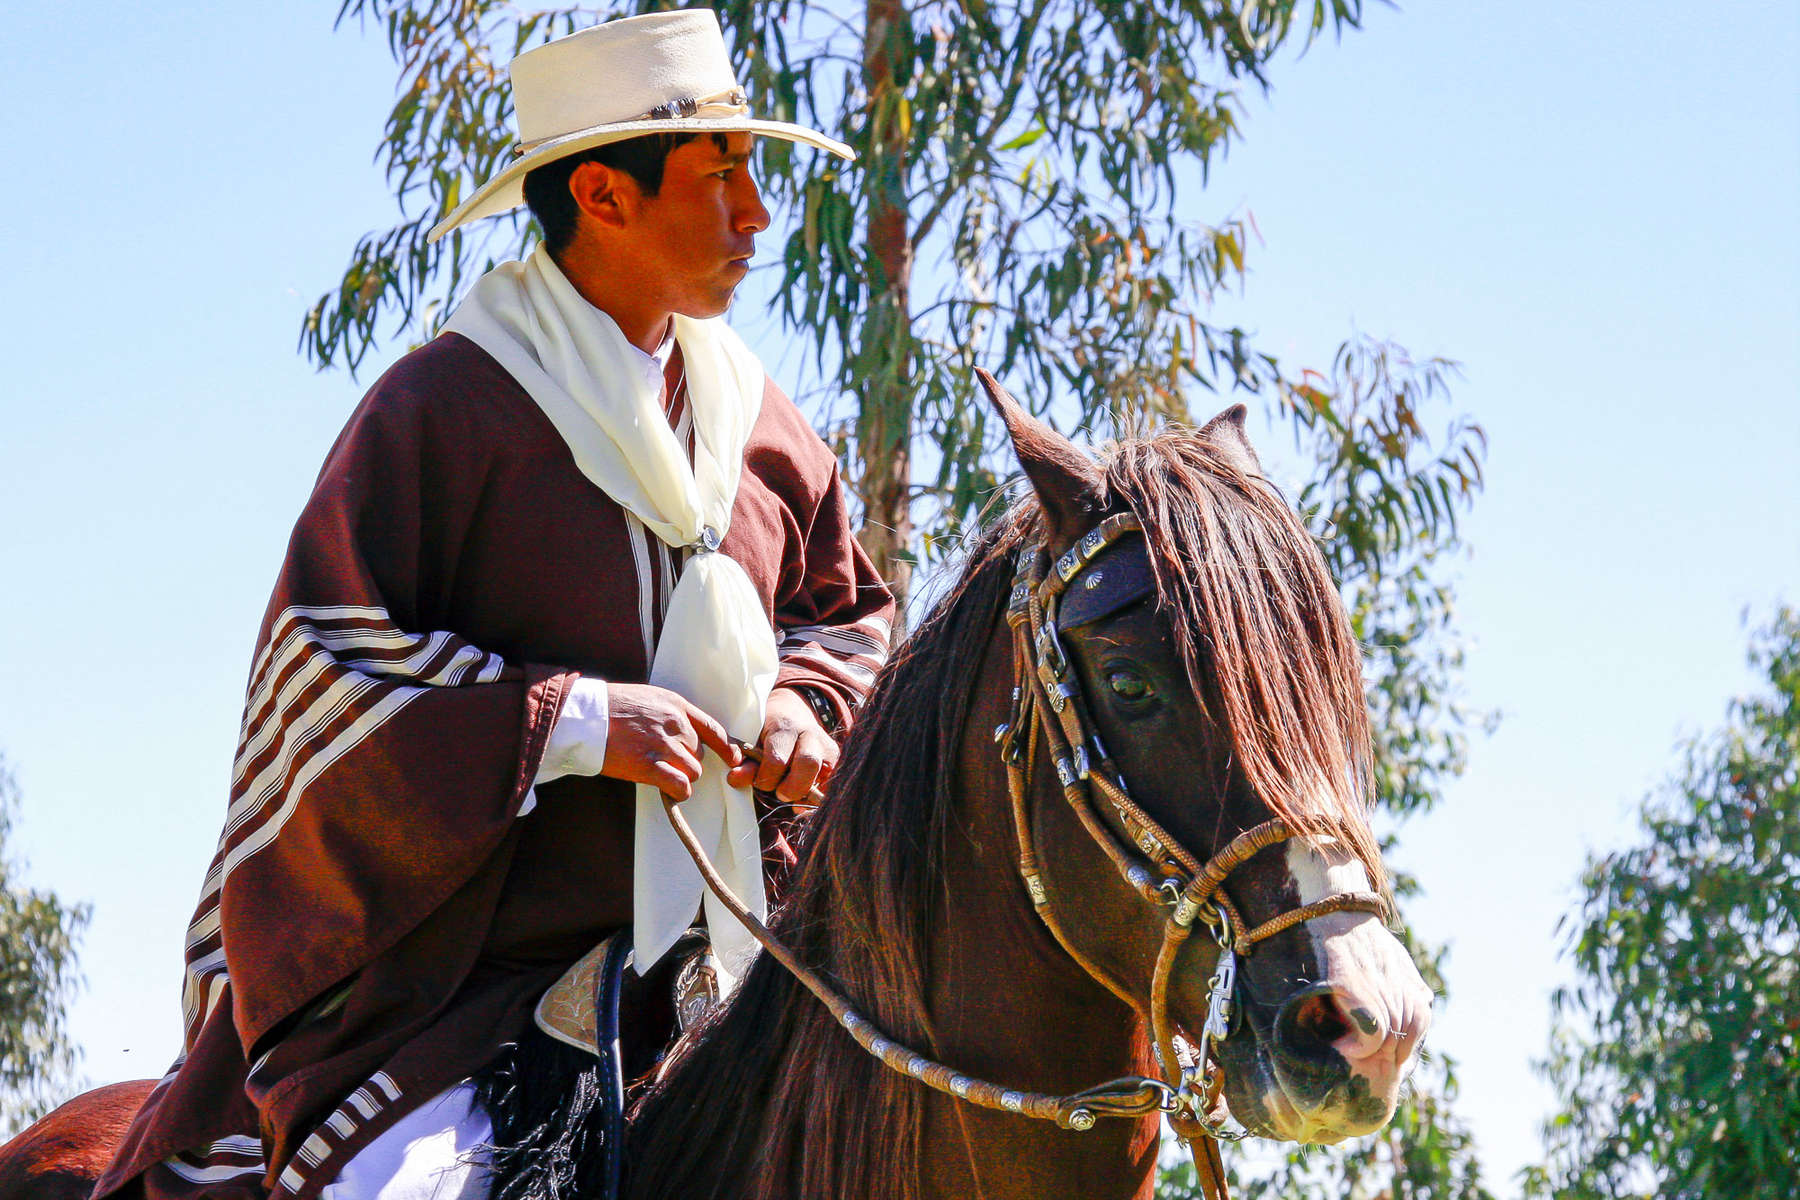 Discover the Colca Canyon trail on horseback